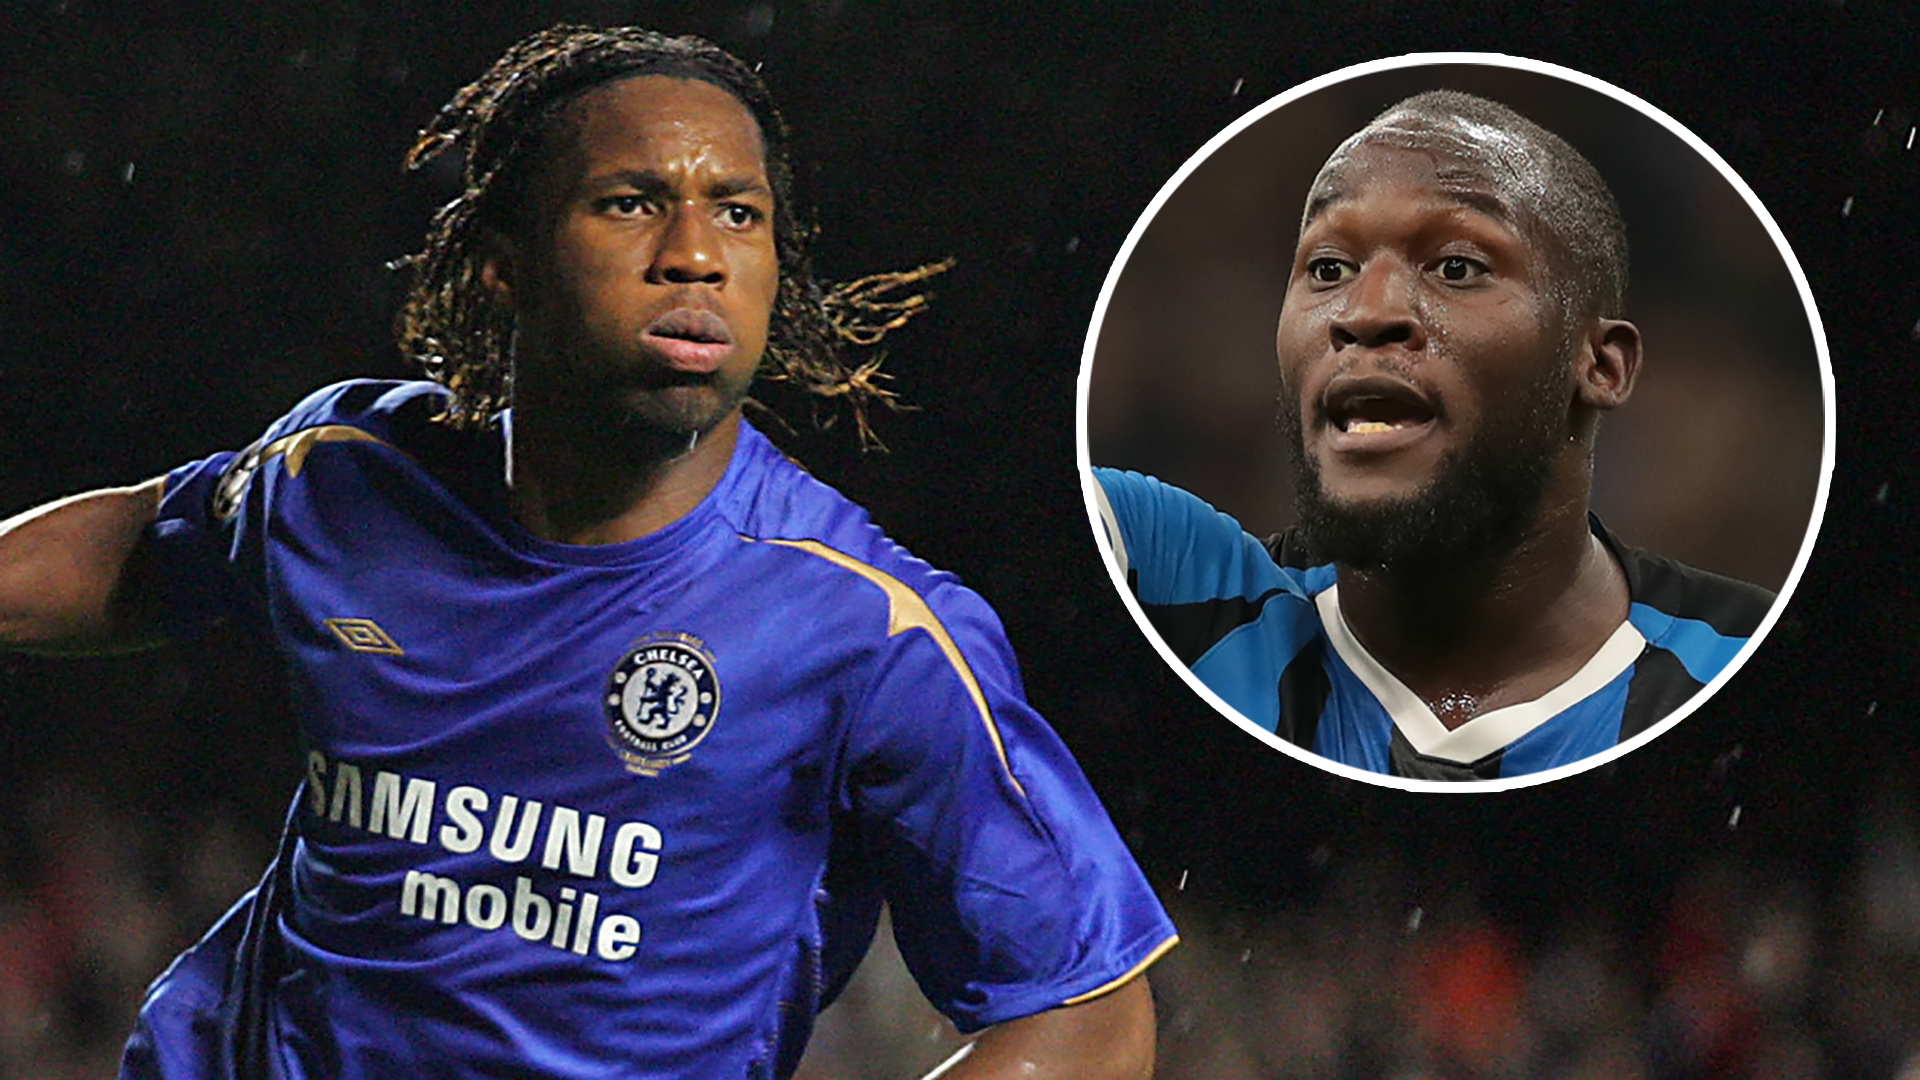 ‘Lukaku could be Chelsea’s modern-day Drogba’ – Former Manchester City defender Mills